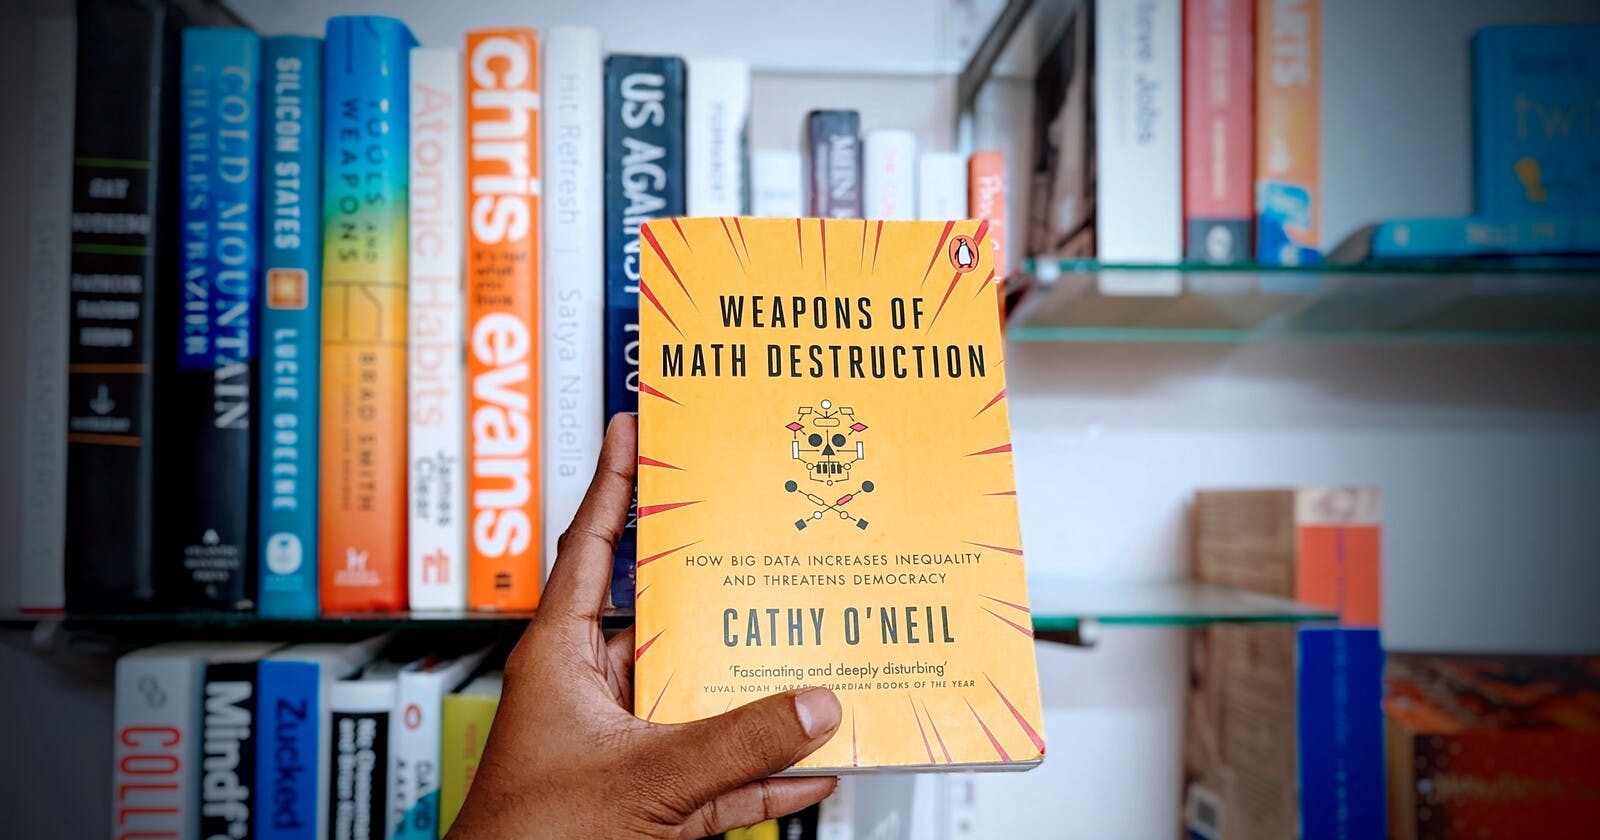 Weapons of Math Destruction
- Cathy O' Neil